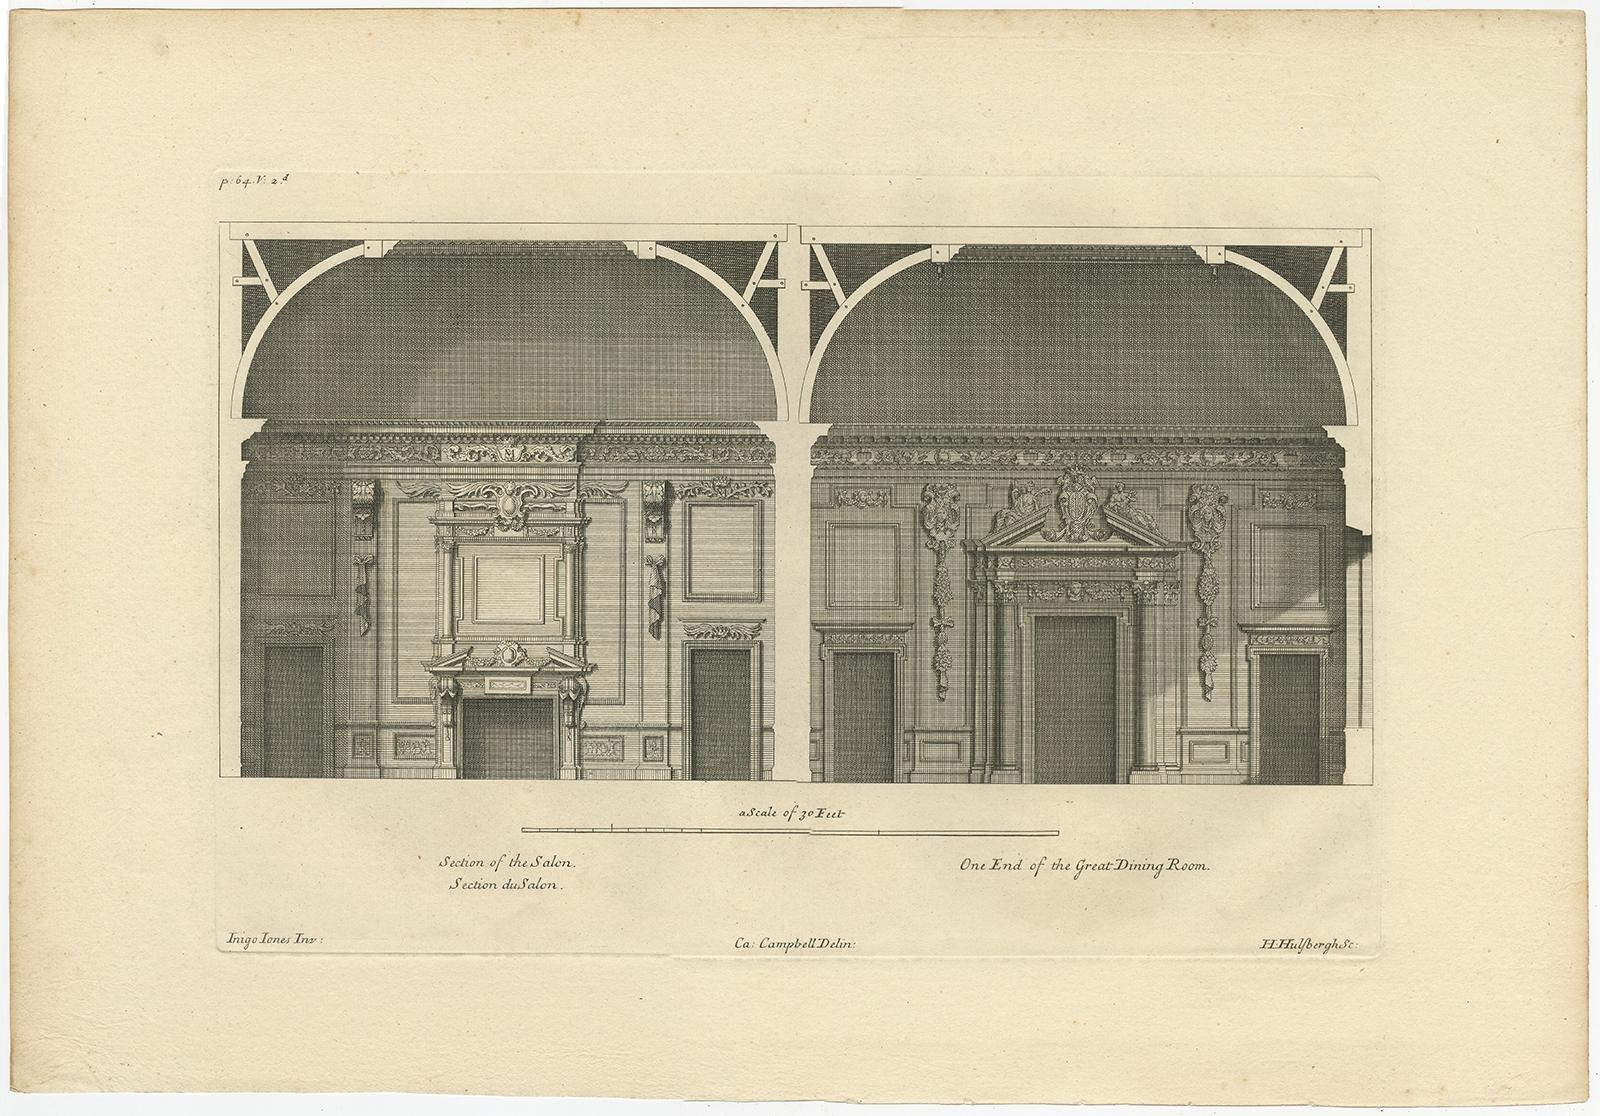 Antique print titled 'Section of the Salon, one end of the great dining room (..)'. 

View of the salon ('Single Cube Room') and great dining room of Wilton House, also known as the 'Double Cube Room' this room was part of a design for a series of